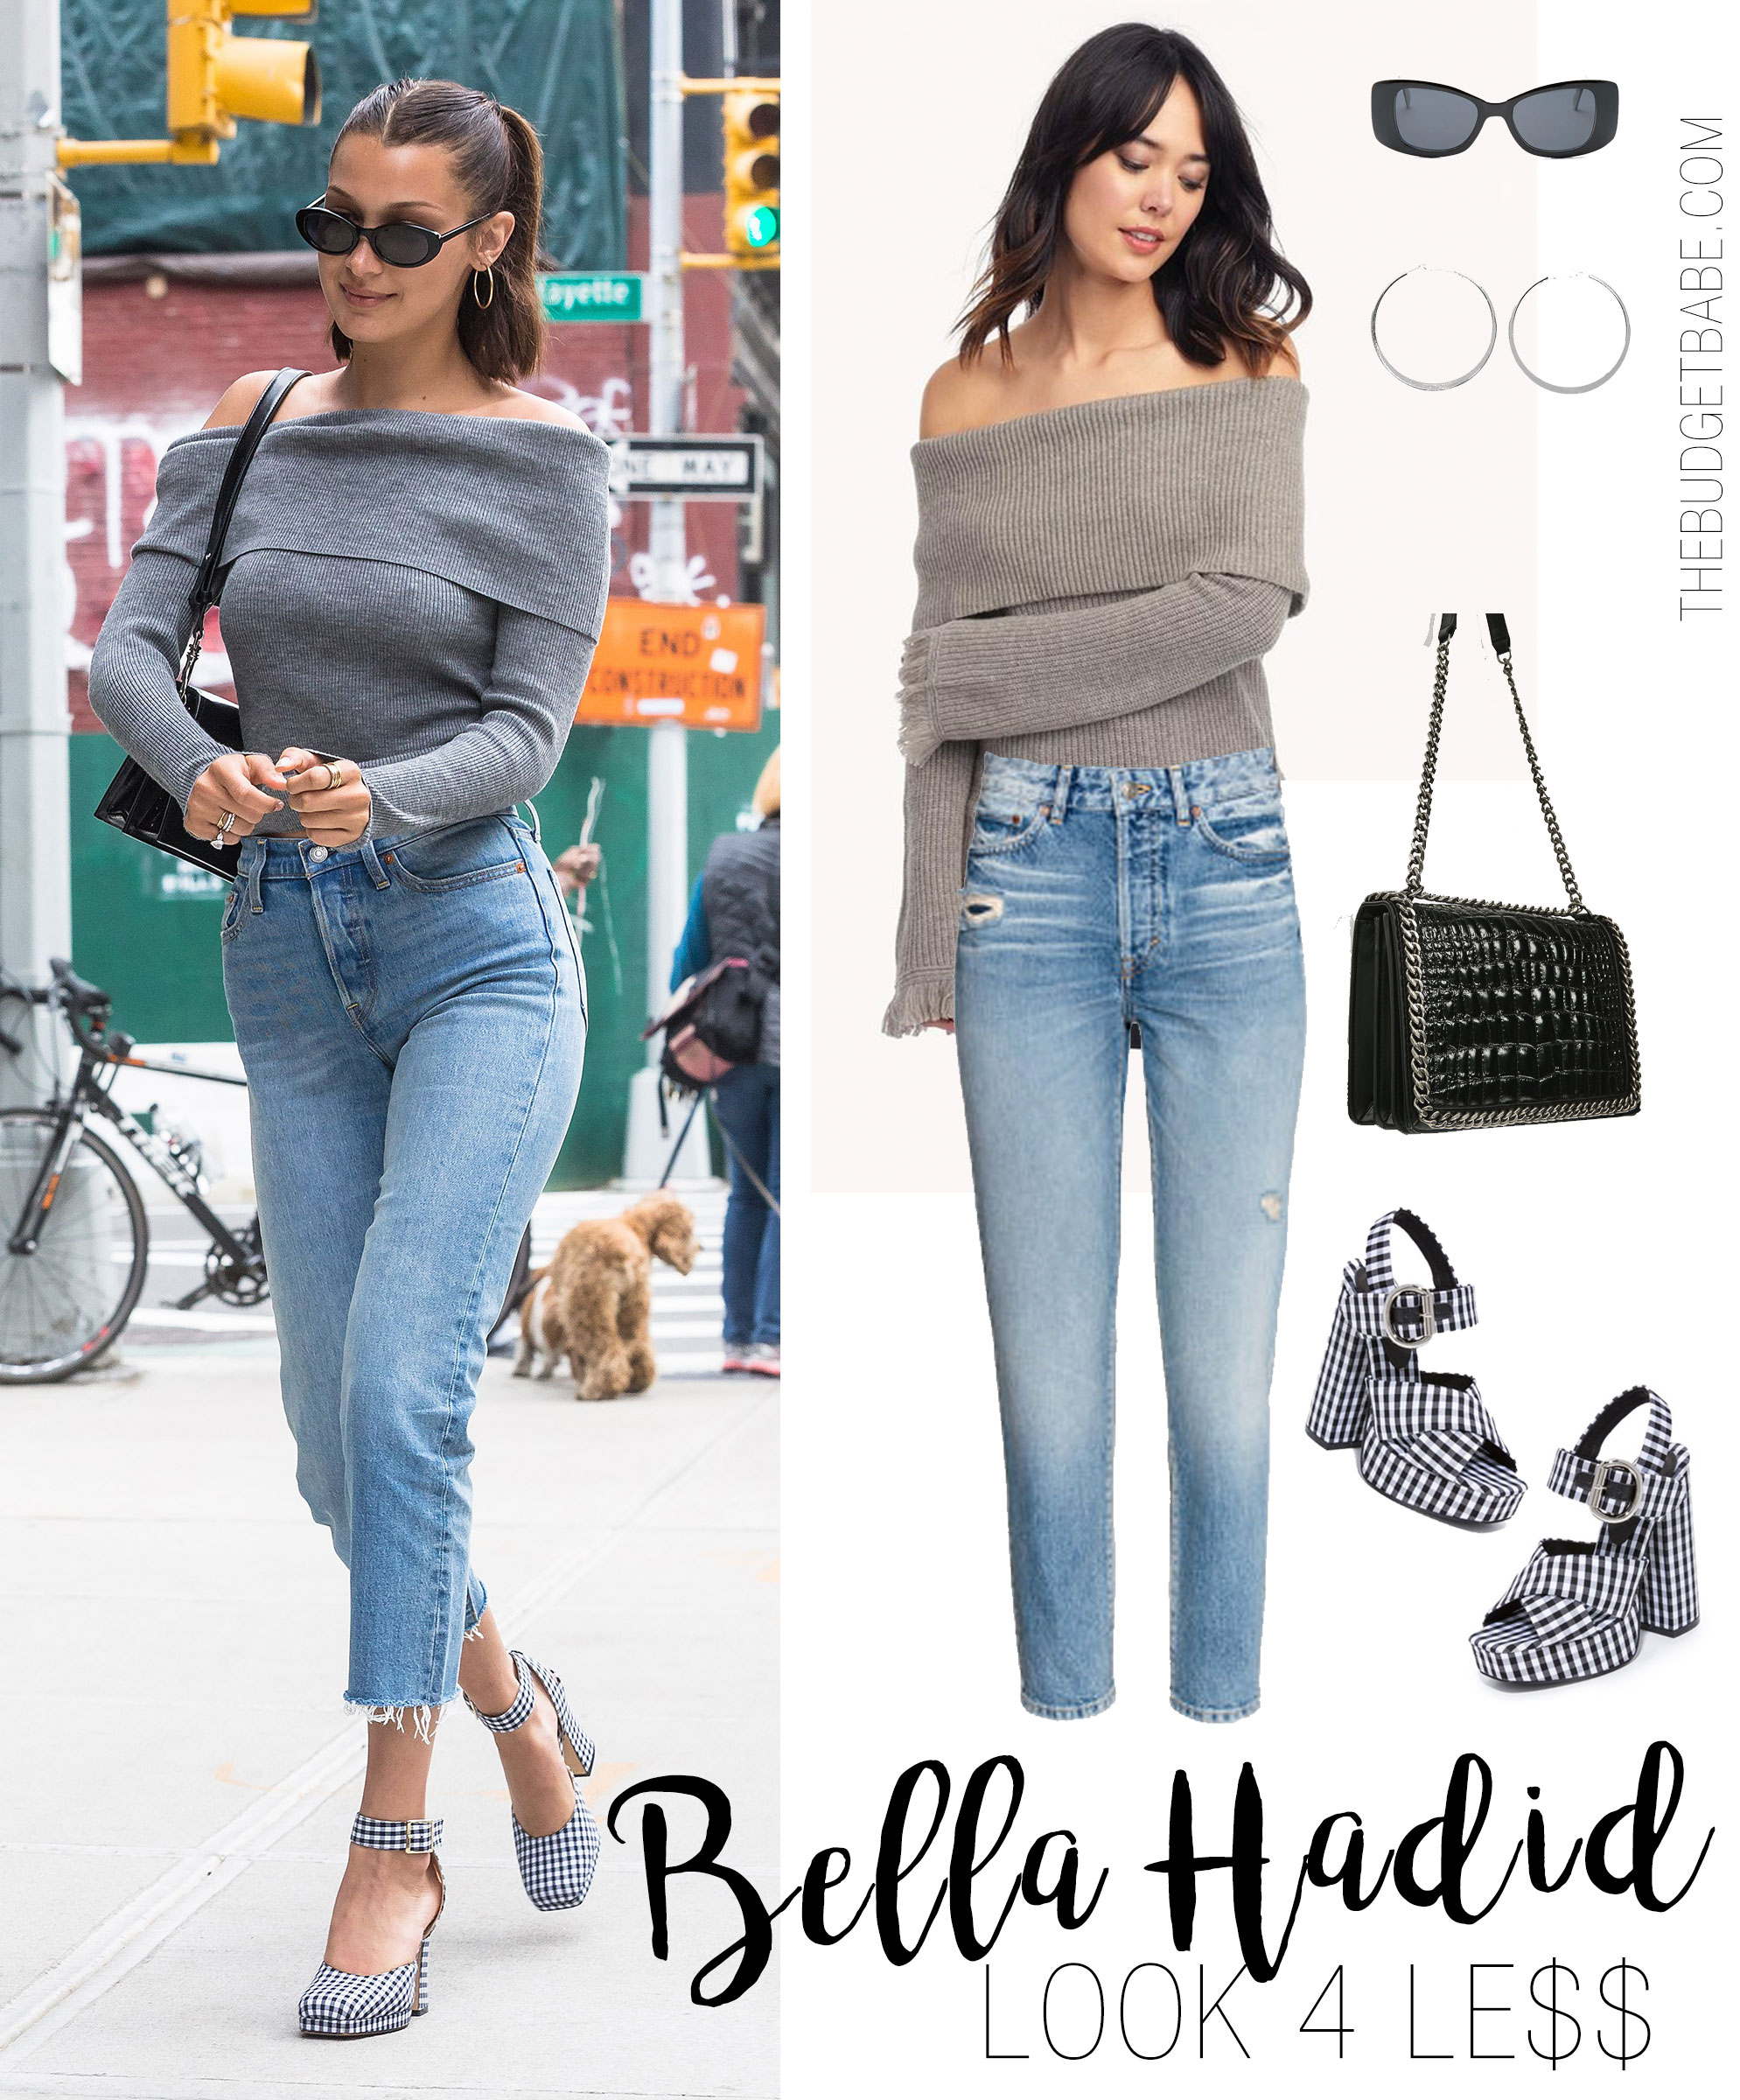 Bella Hadid looks cute and casual in a gray off the shoulder sweater, high waist jeans and gingham platform pumps.